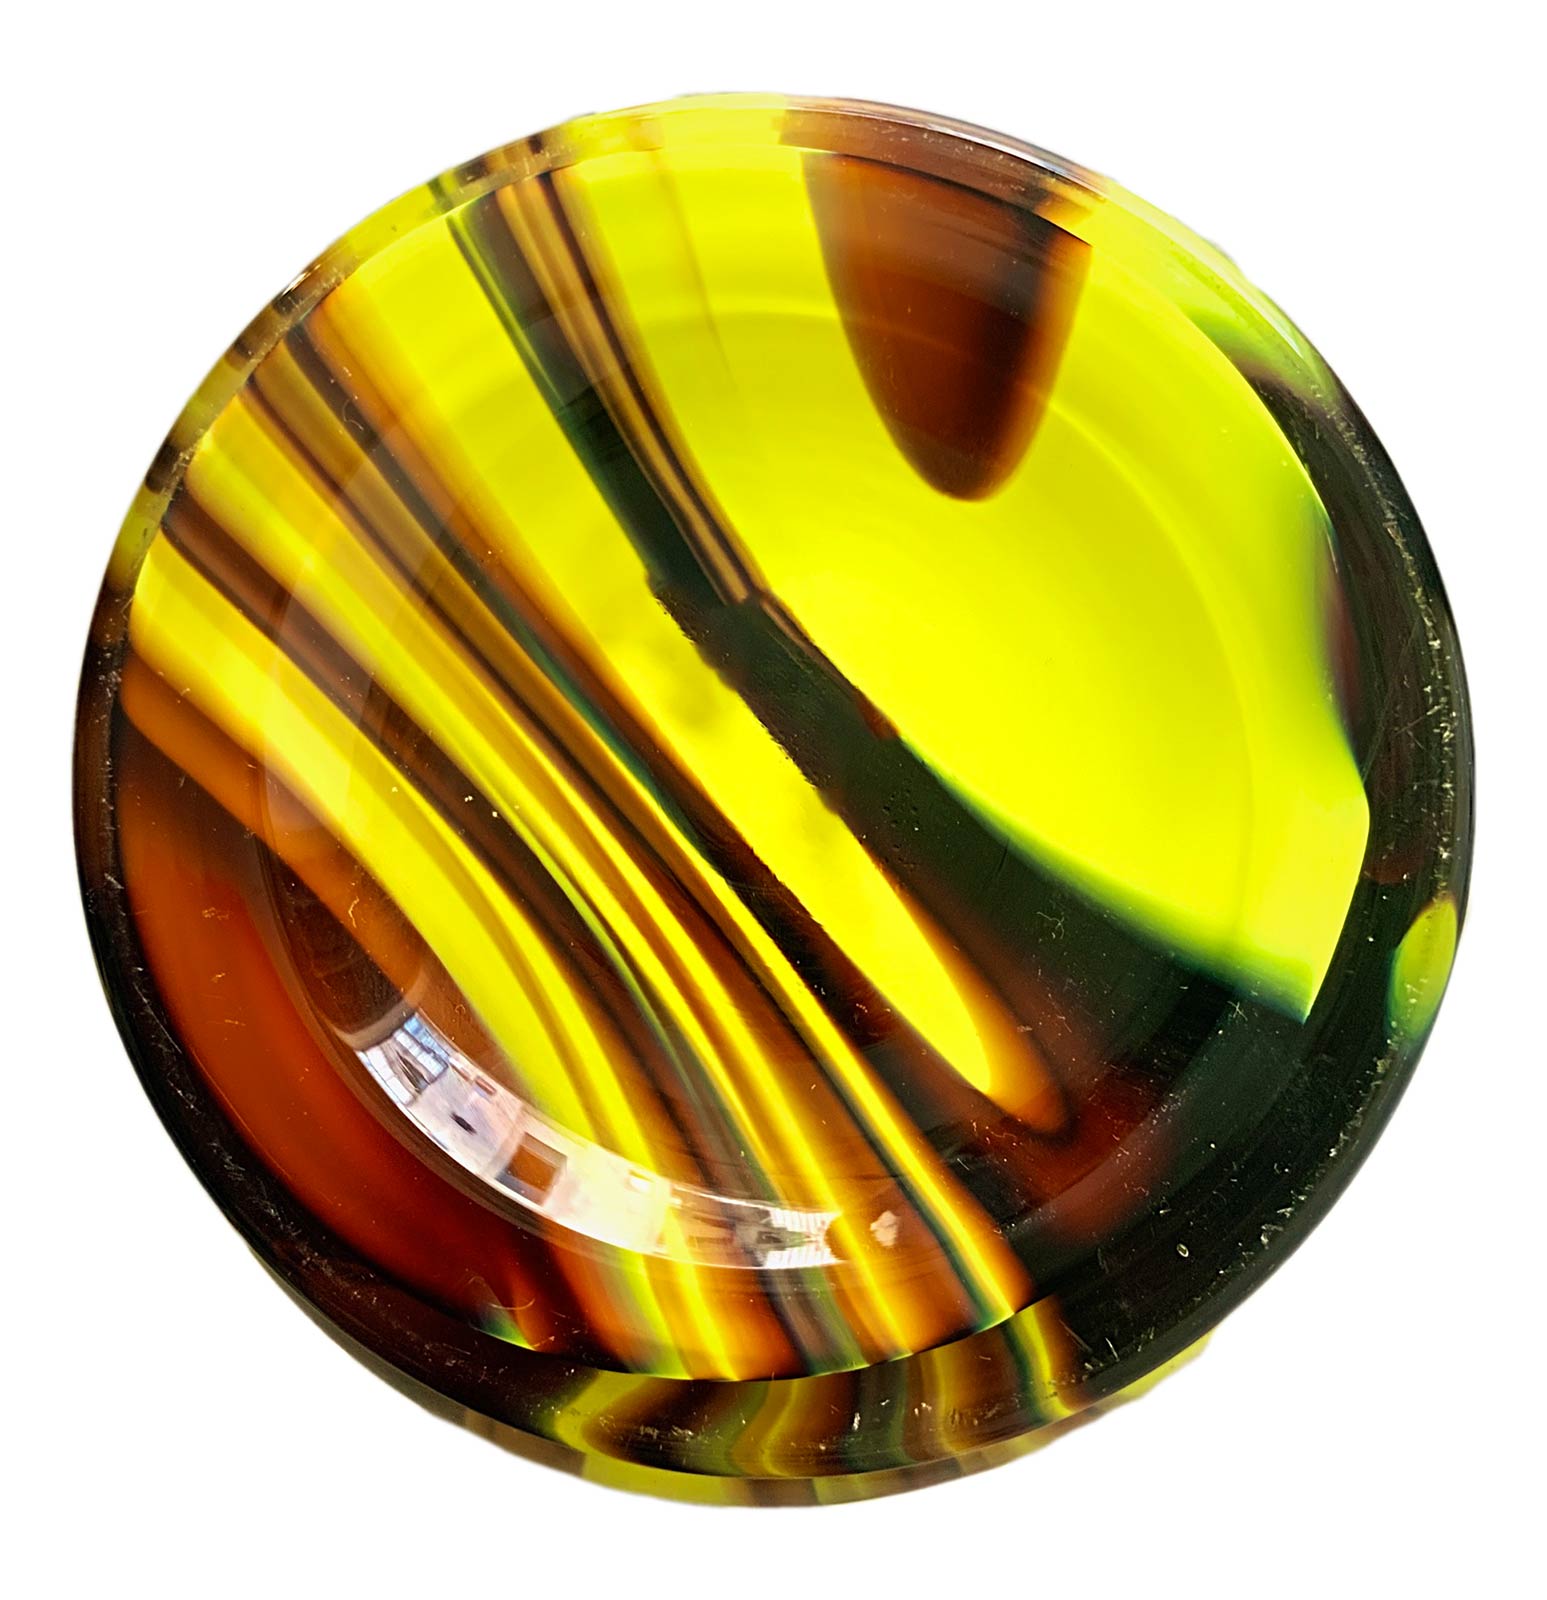 Carlo Moretti, Murano. Variegated glass vase with yellow and shades of brown, spherical body, tall - Image 4 of 4